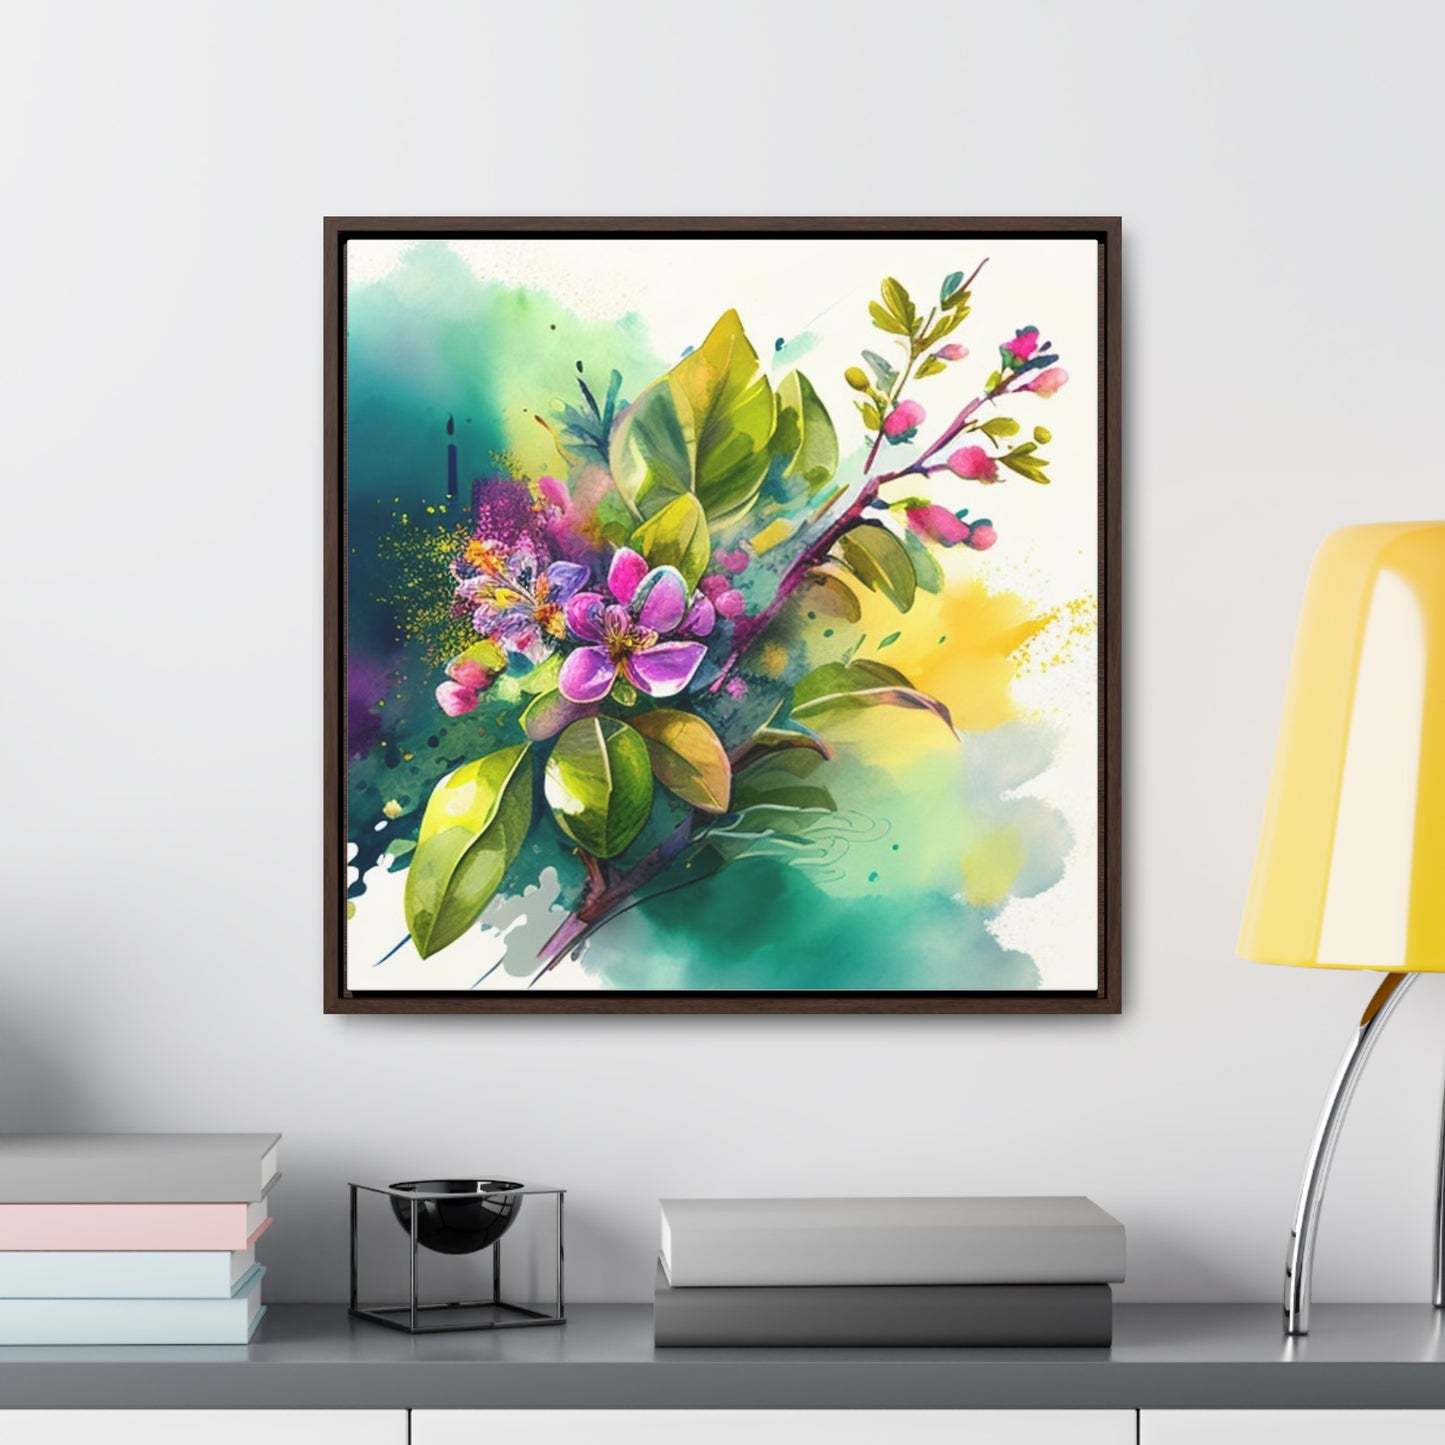 Gallery Canvas Wraps, Square Frame Mother Nature Bright Spring Colors Realistic Watercolor 1